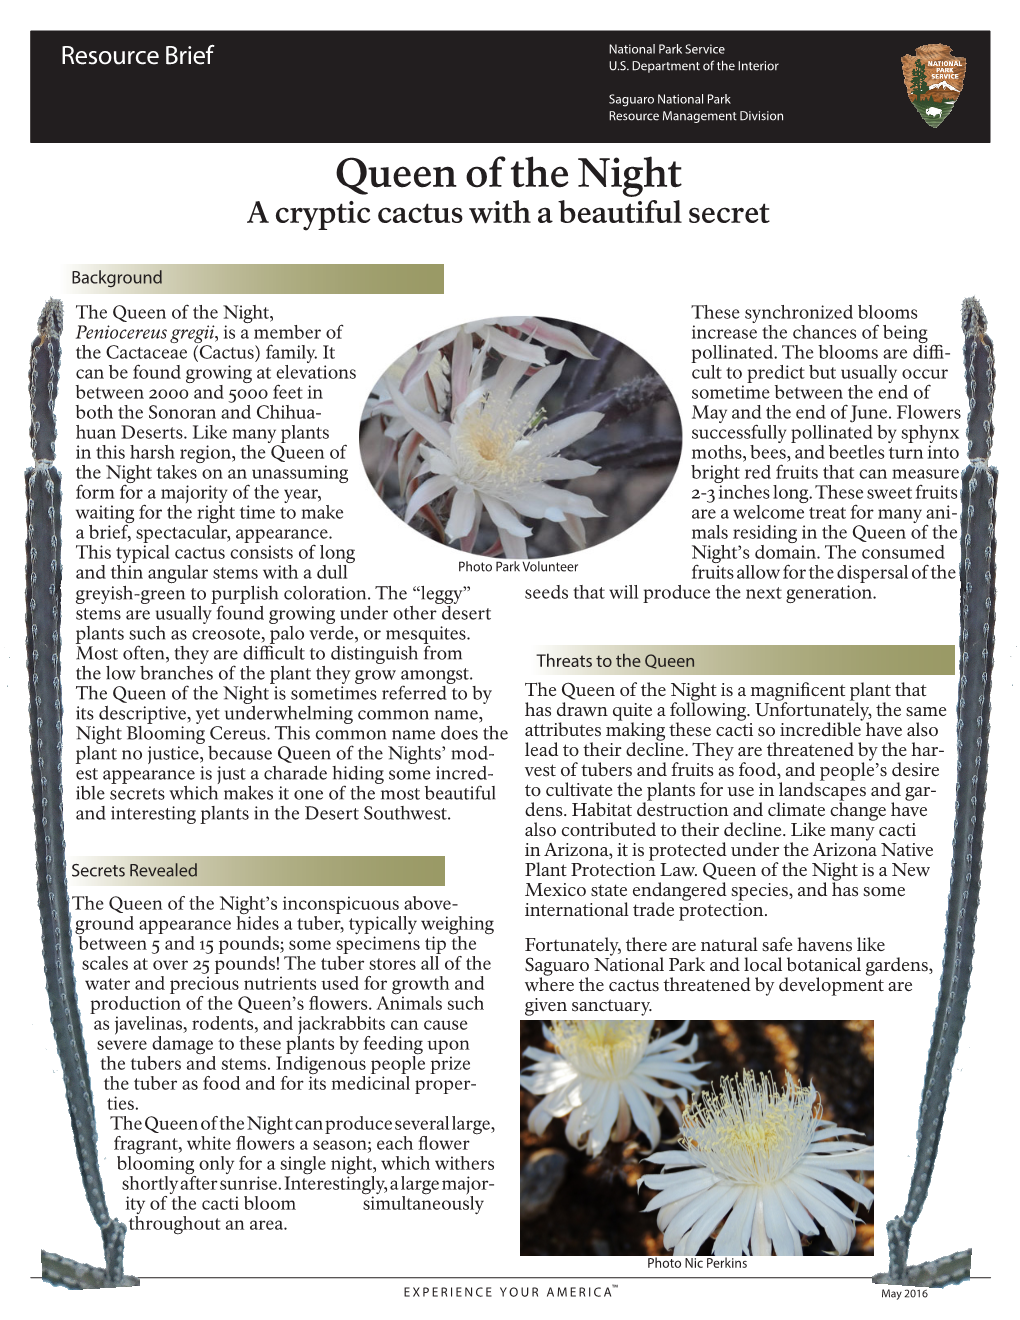 Queen of the Night a Cryptic Cactus with a Beautiful Secret